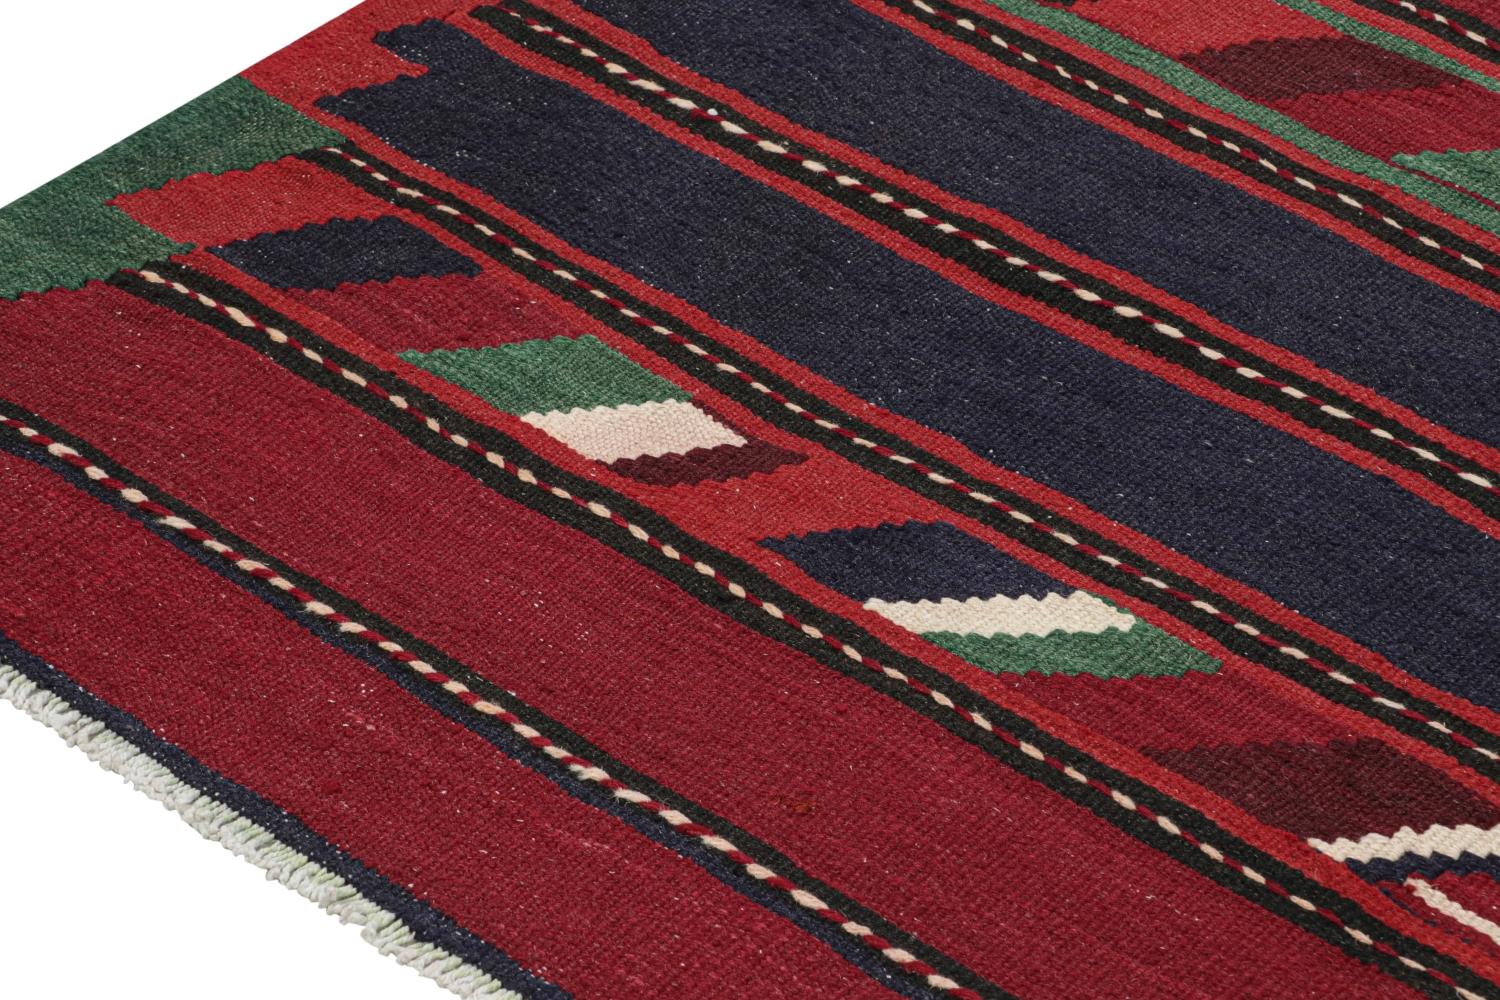 Mid-20th Century Vintage Persian Bidjar Kilim in Red, Blue and Green Geometric Patterns For Sale